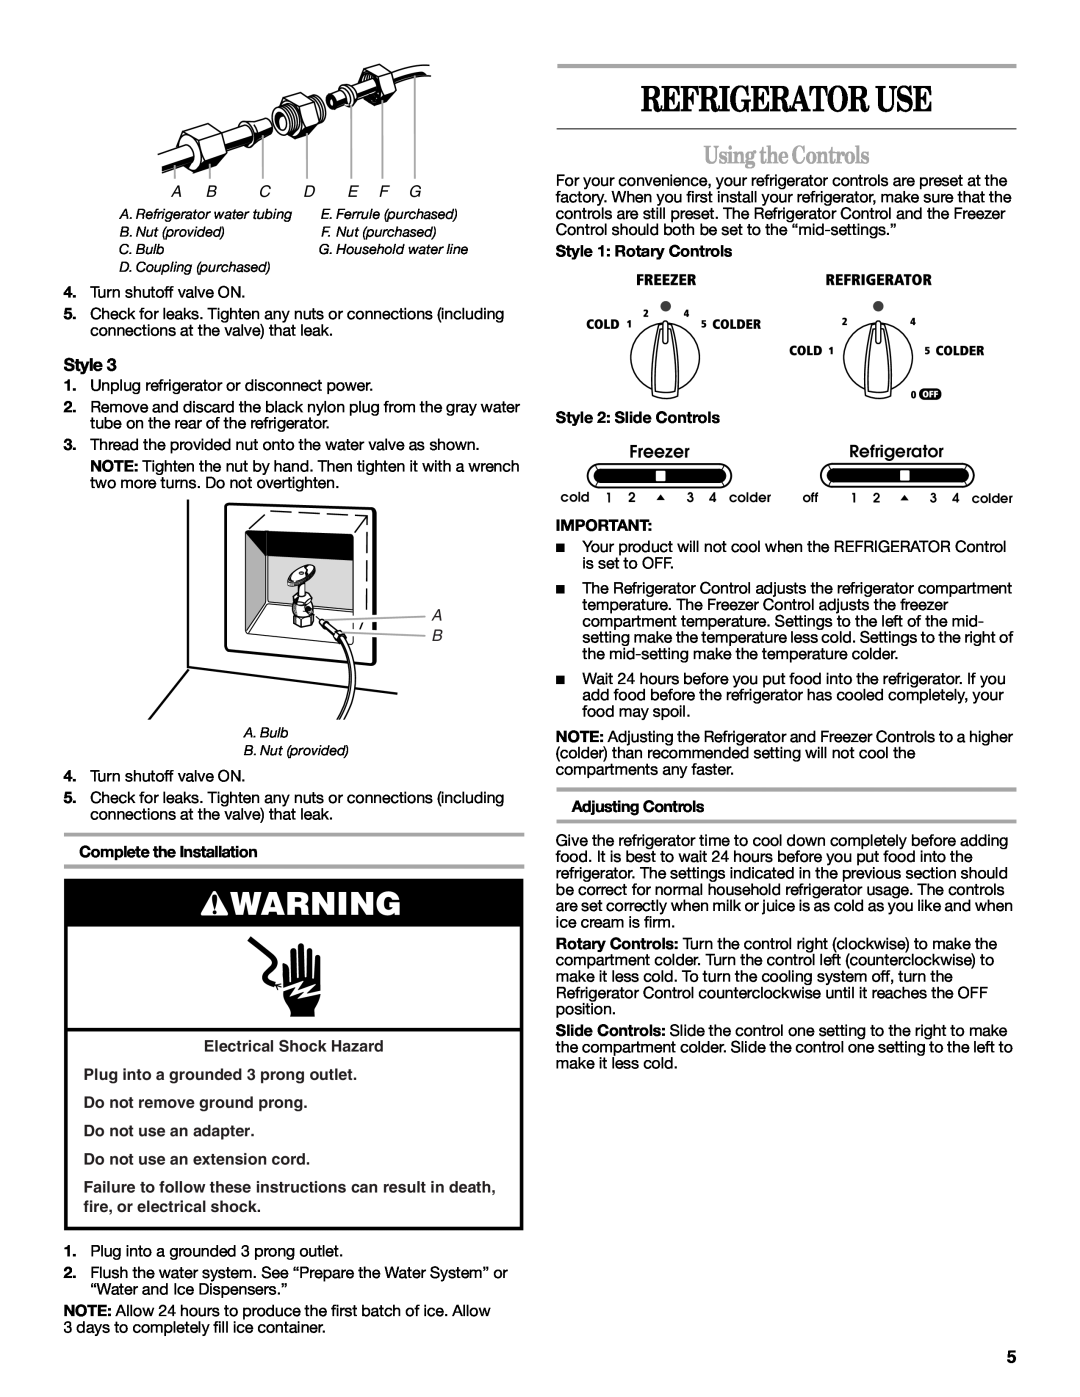 Amana W10237701A Refrigerator Use, Using theControls, E F G, Complete the Installation, Electrical Shock Hazard 